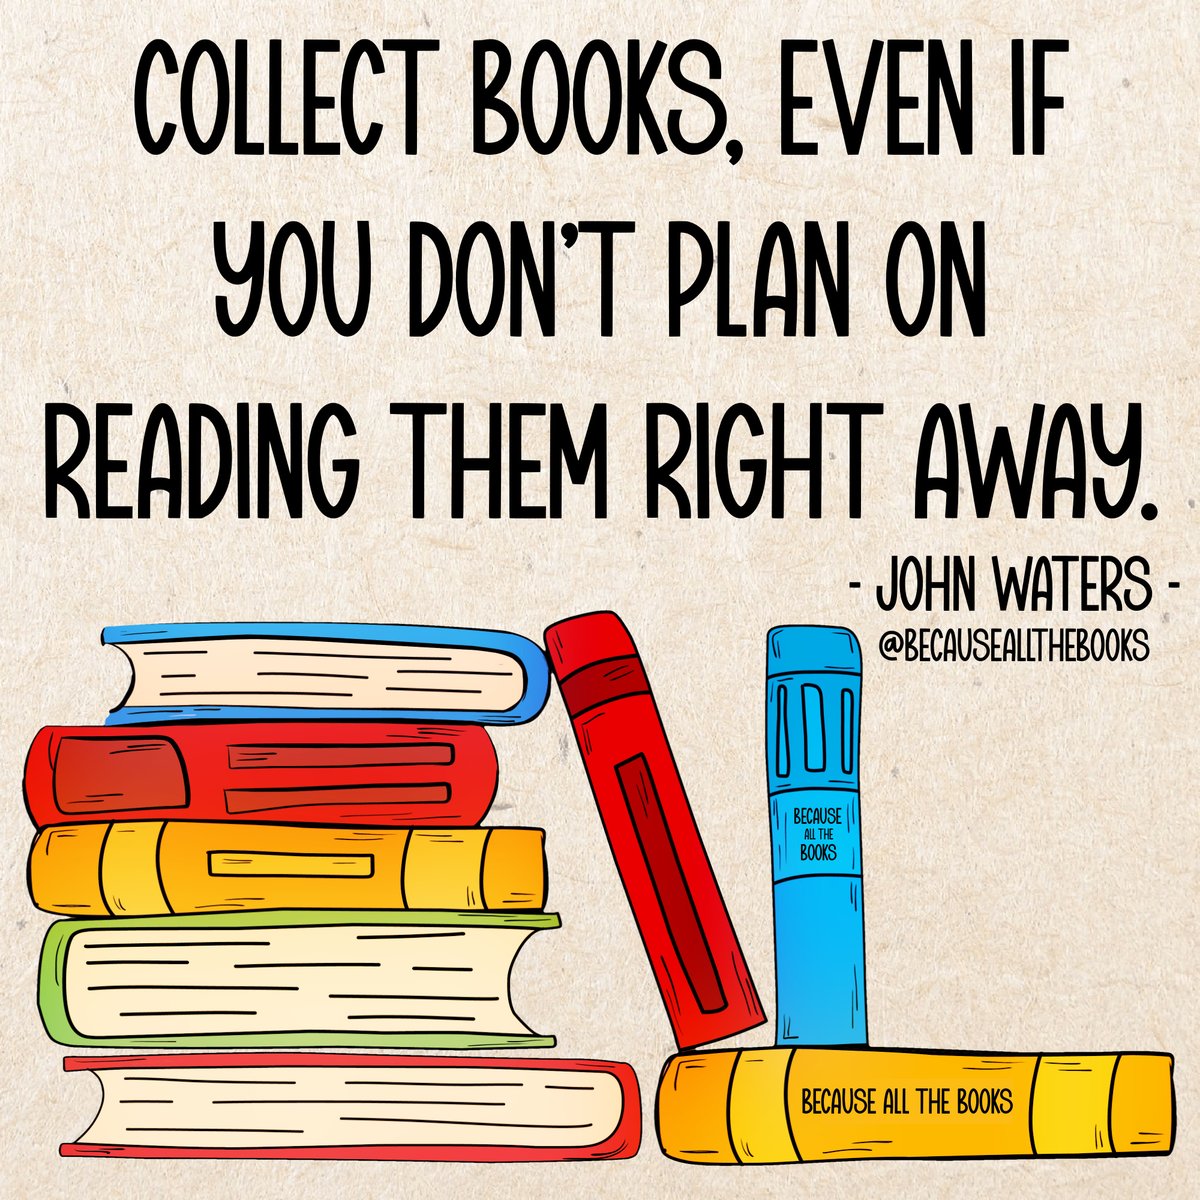 Wise advice! 

#BecauseAllTheBooks #BookCollection #BookCollector #GiveMeAllTheBooks #MoreBooks